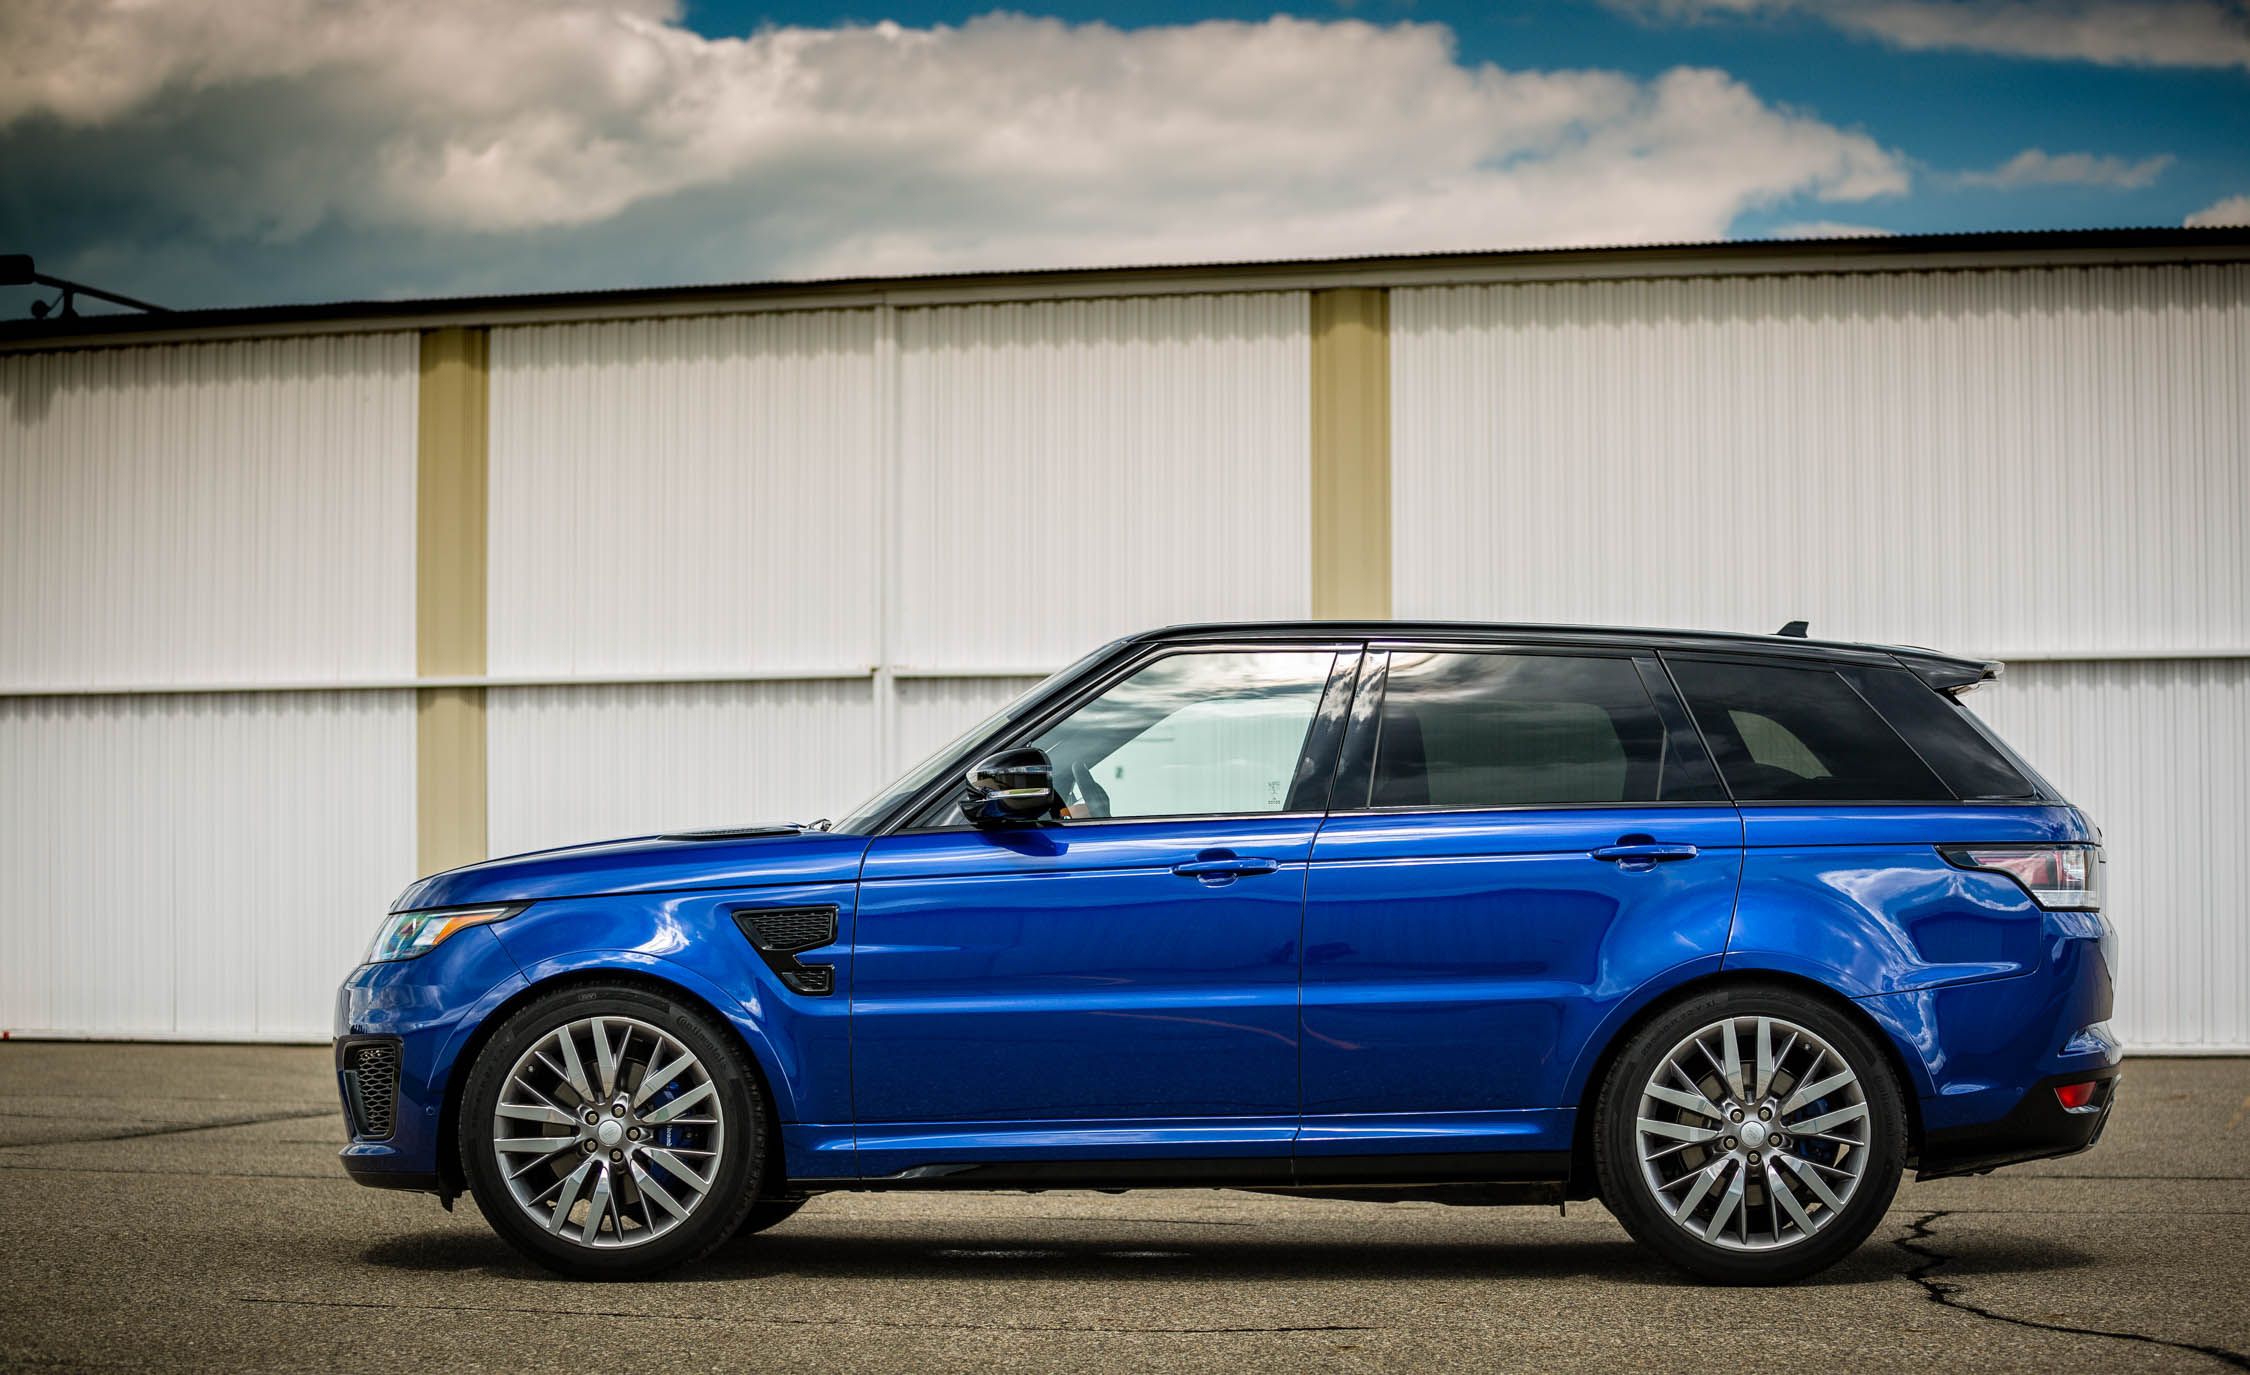 2016 Land Rover Range Rover Sport SVR (View 3 of 7)